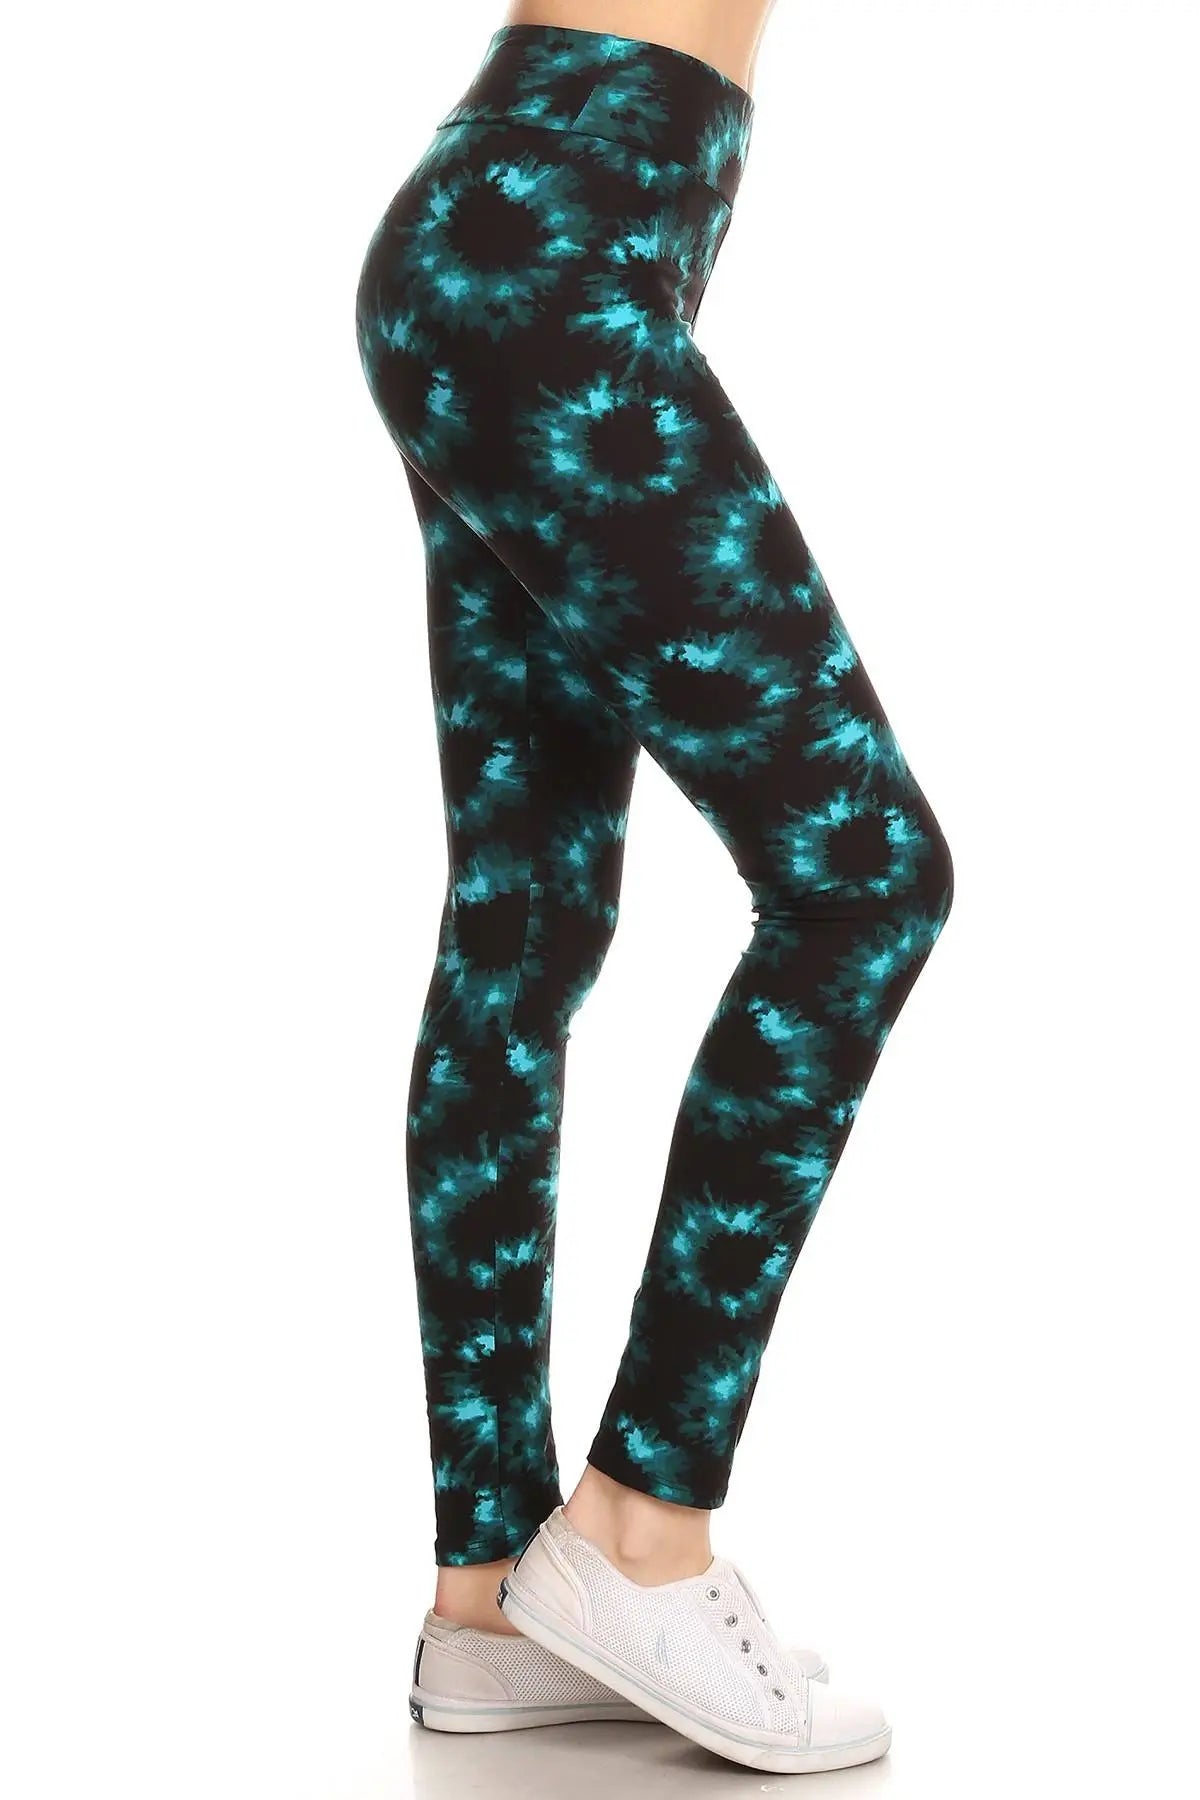 Yoga Style Banded Lined Tie Dye Printed Knit Legging With High Waist Sunny EvE Fashion